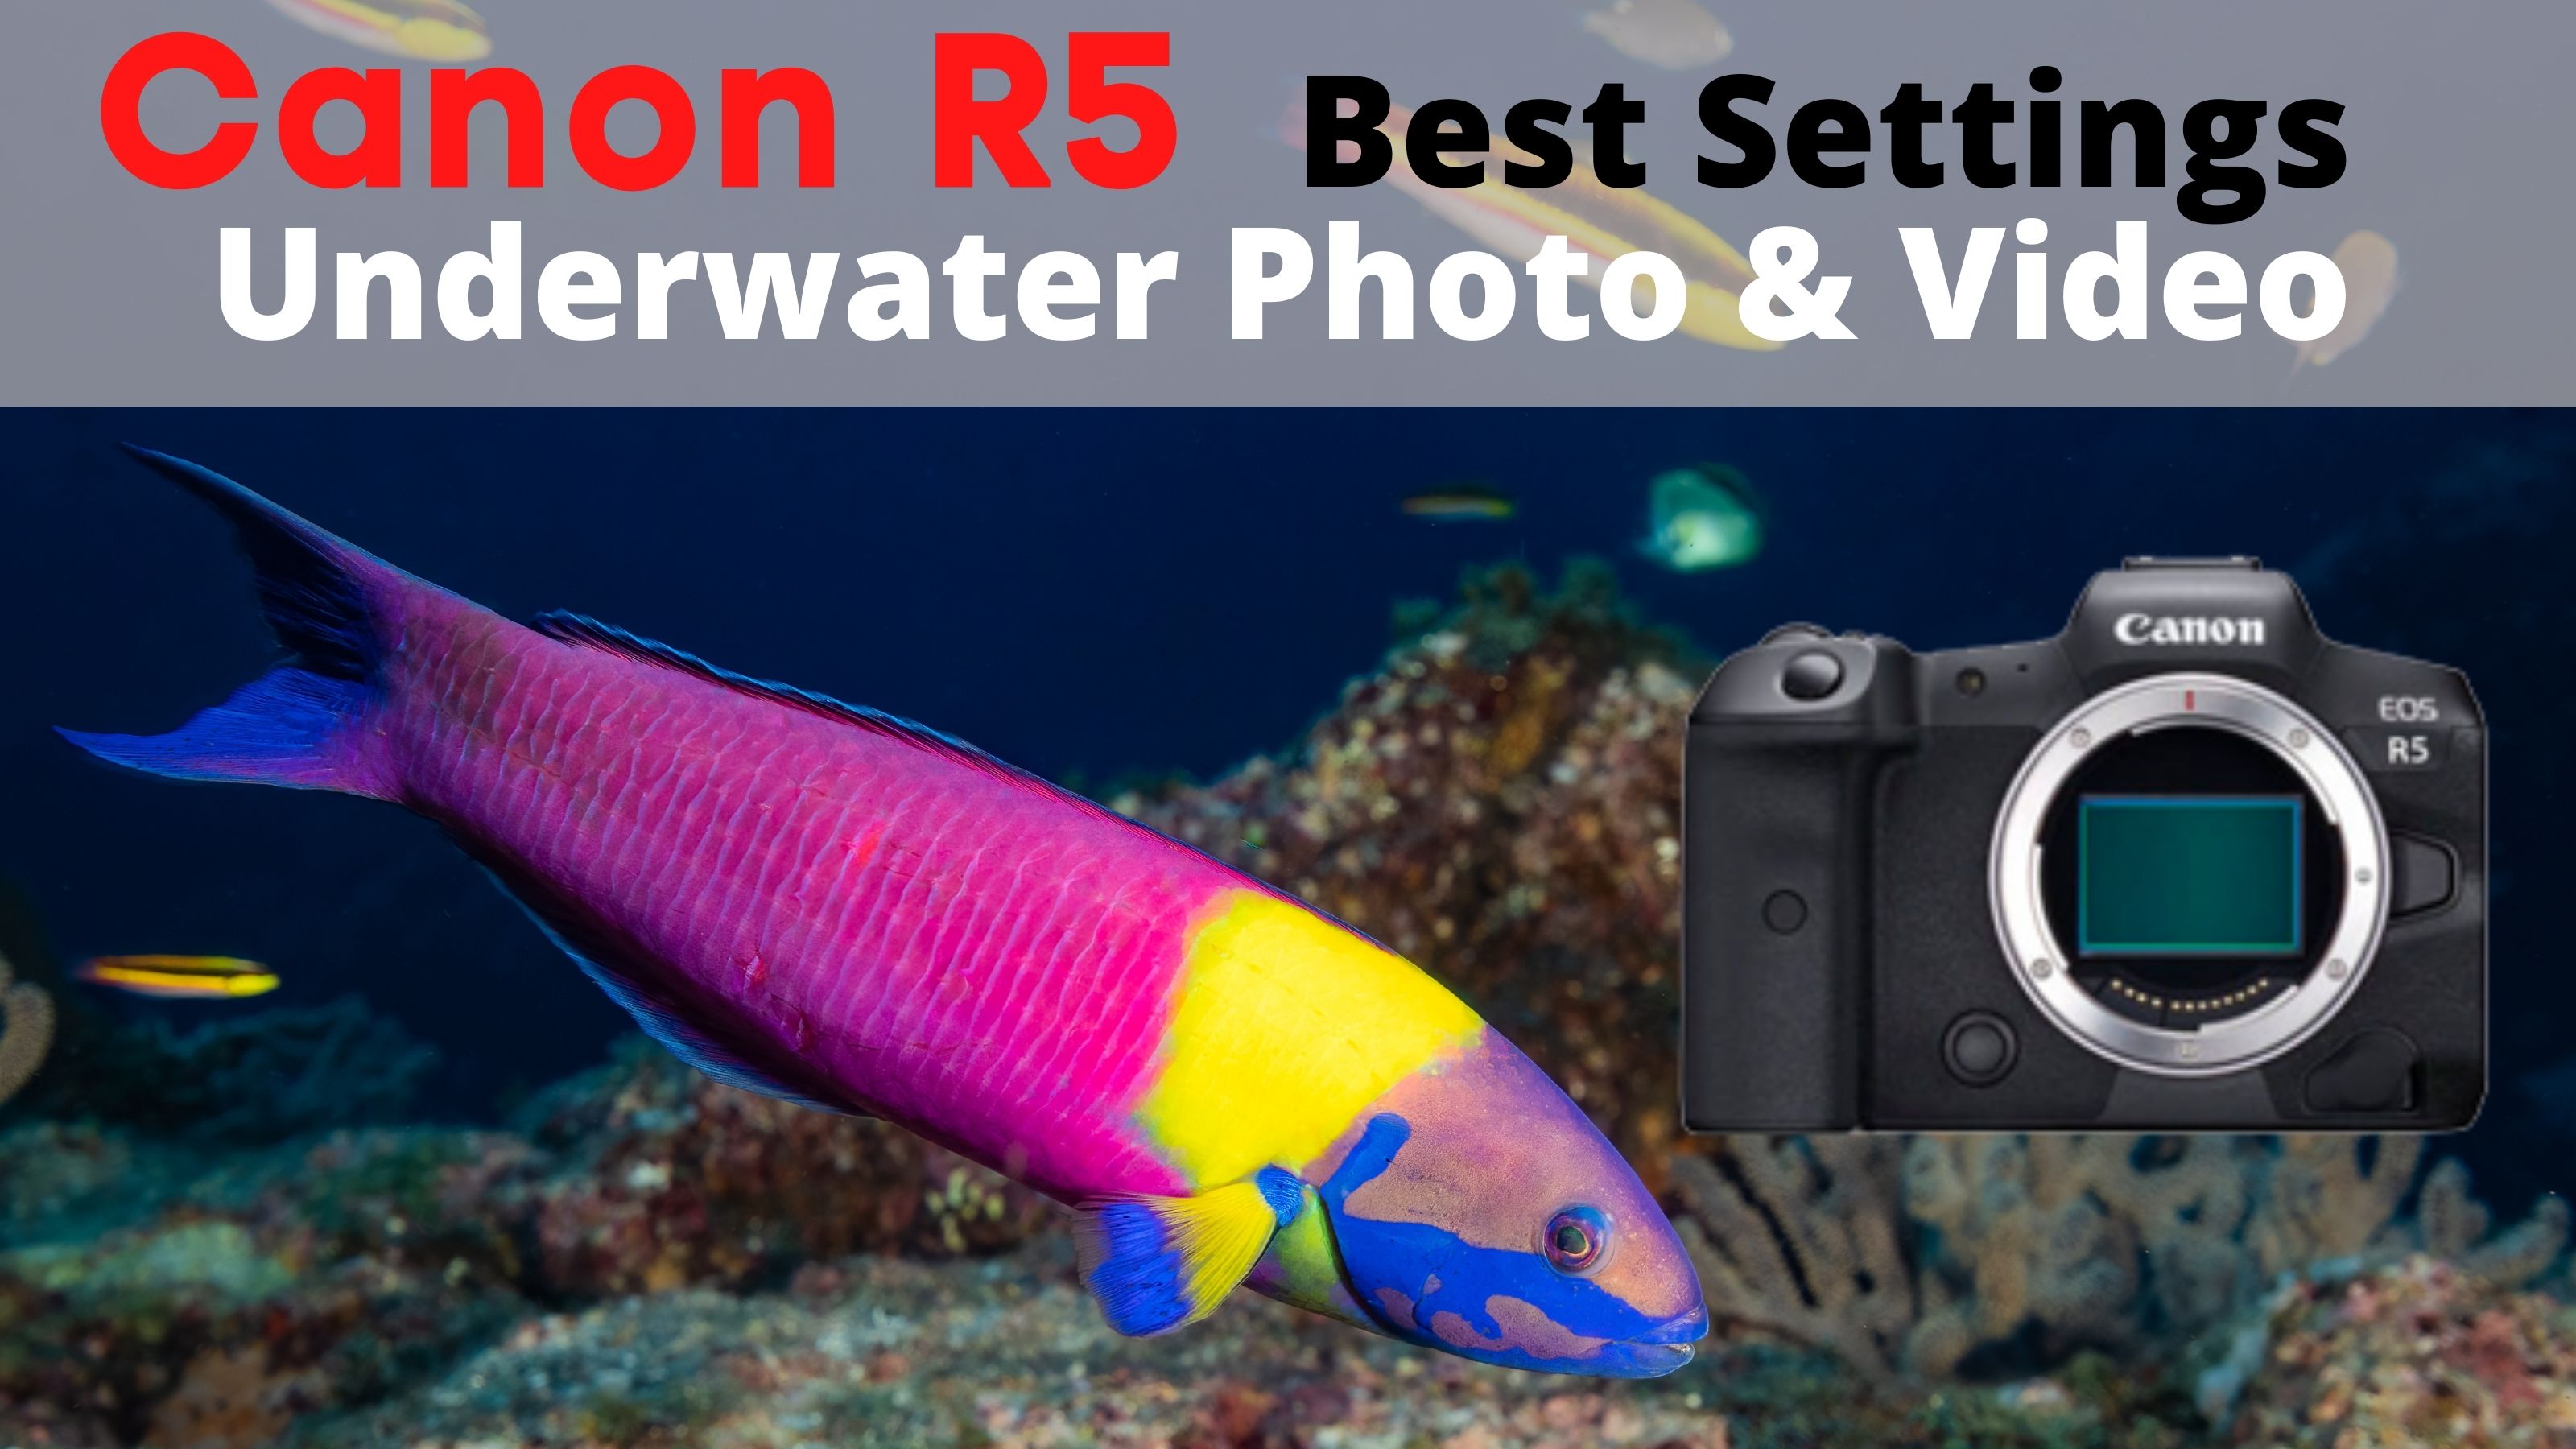 Canon EOS R5 Underwater Photo & Video Settings: Full Setup Video Guide